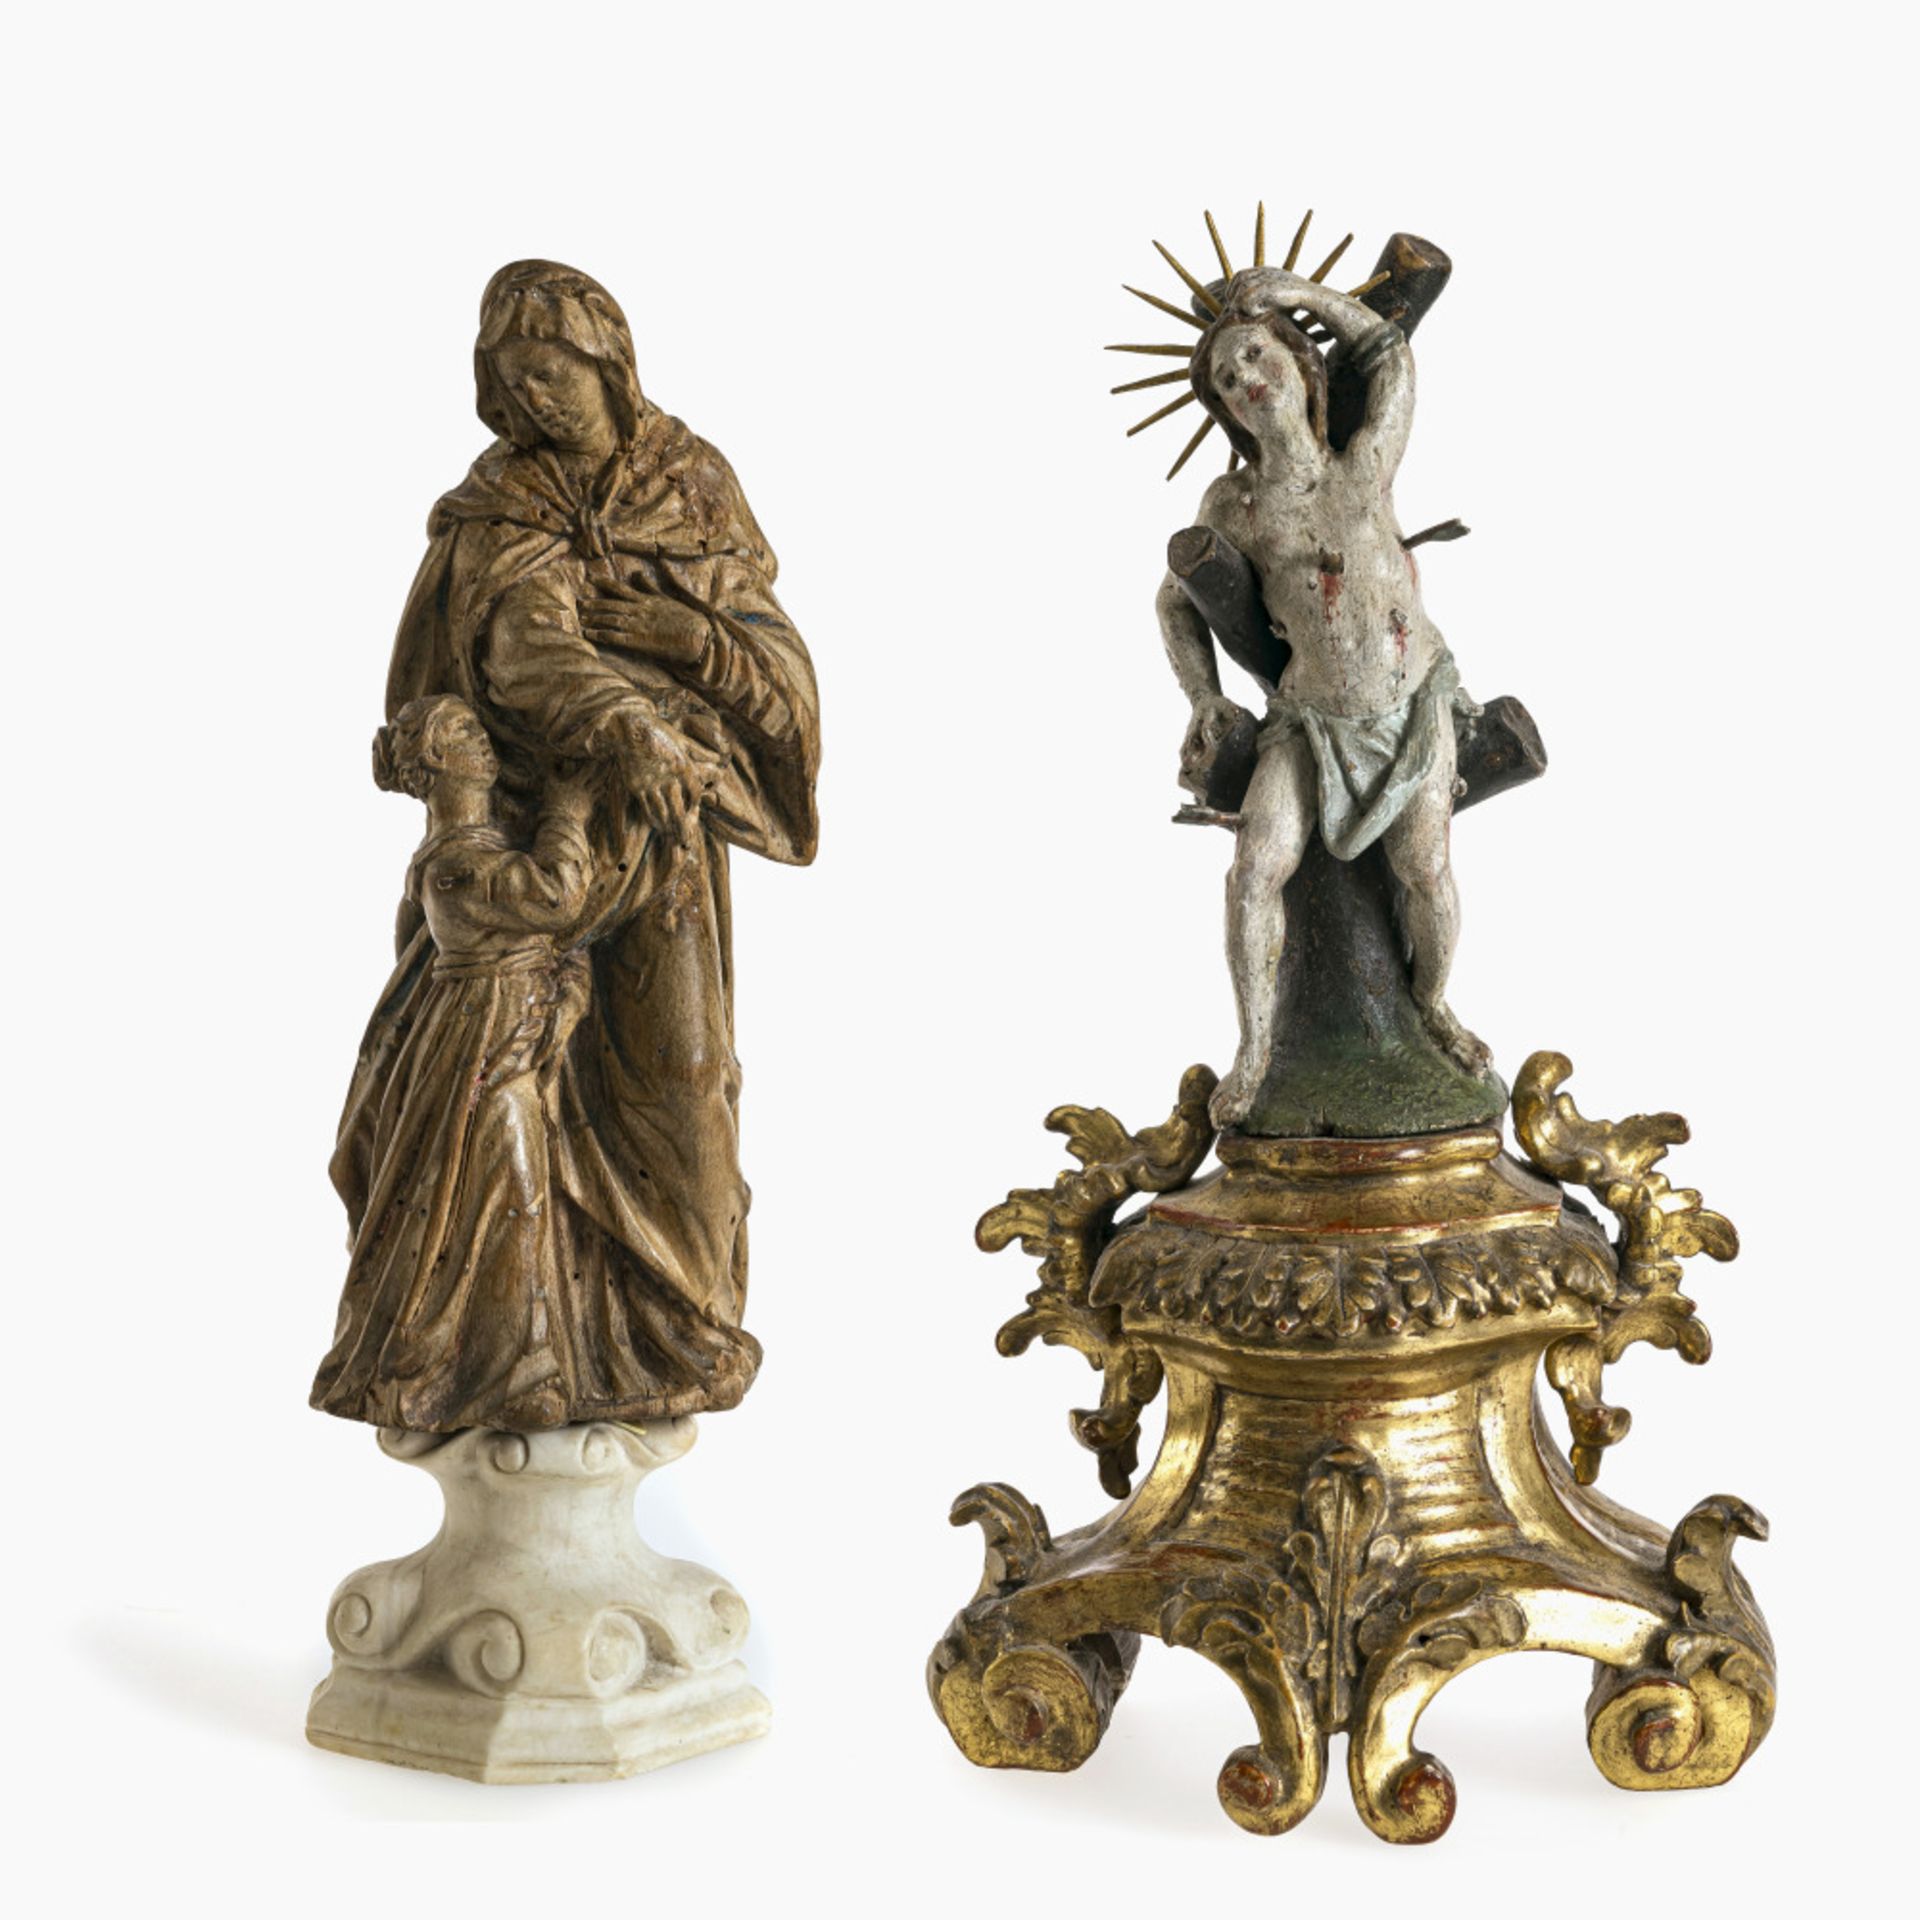 St. Anne with Mary - South German, late 17th century